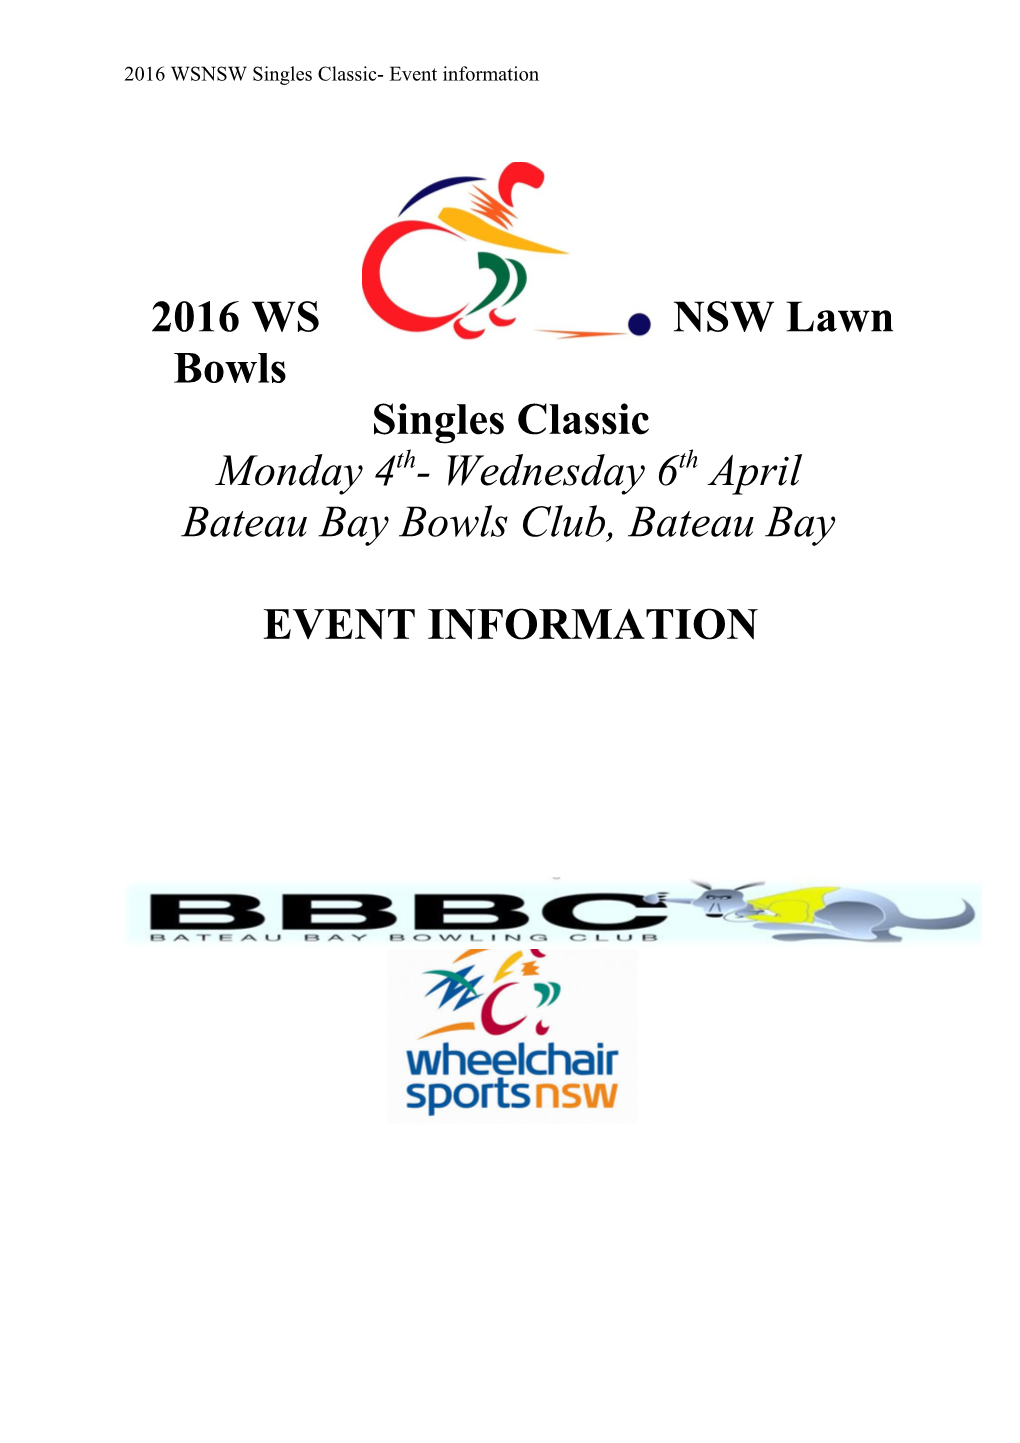 2016 WSNSW Singles Classic- Event Information